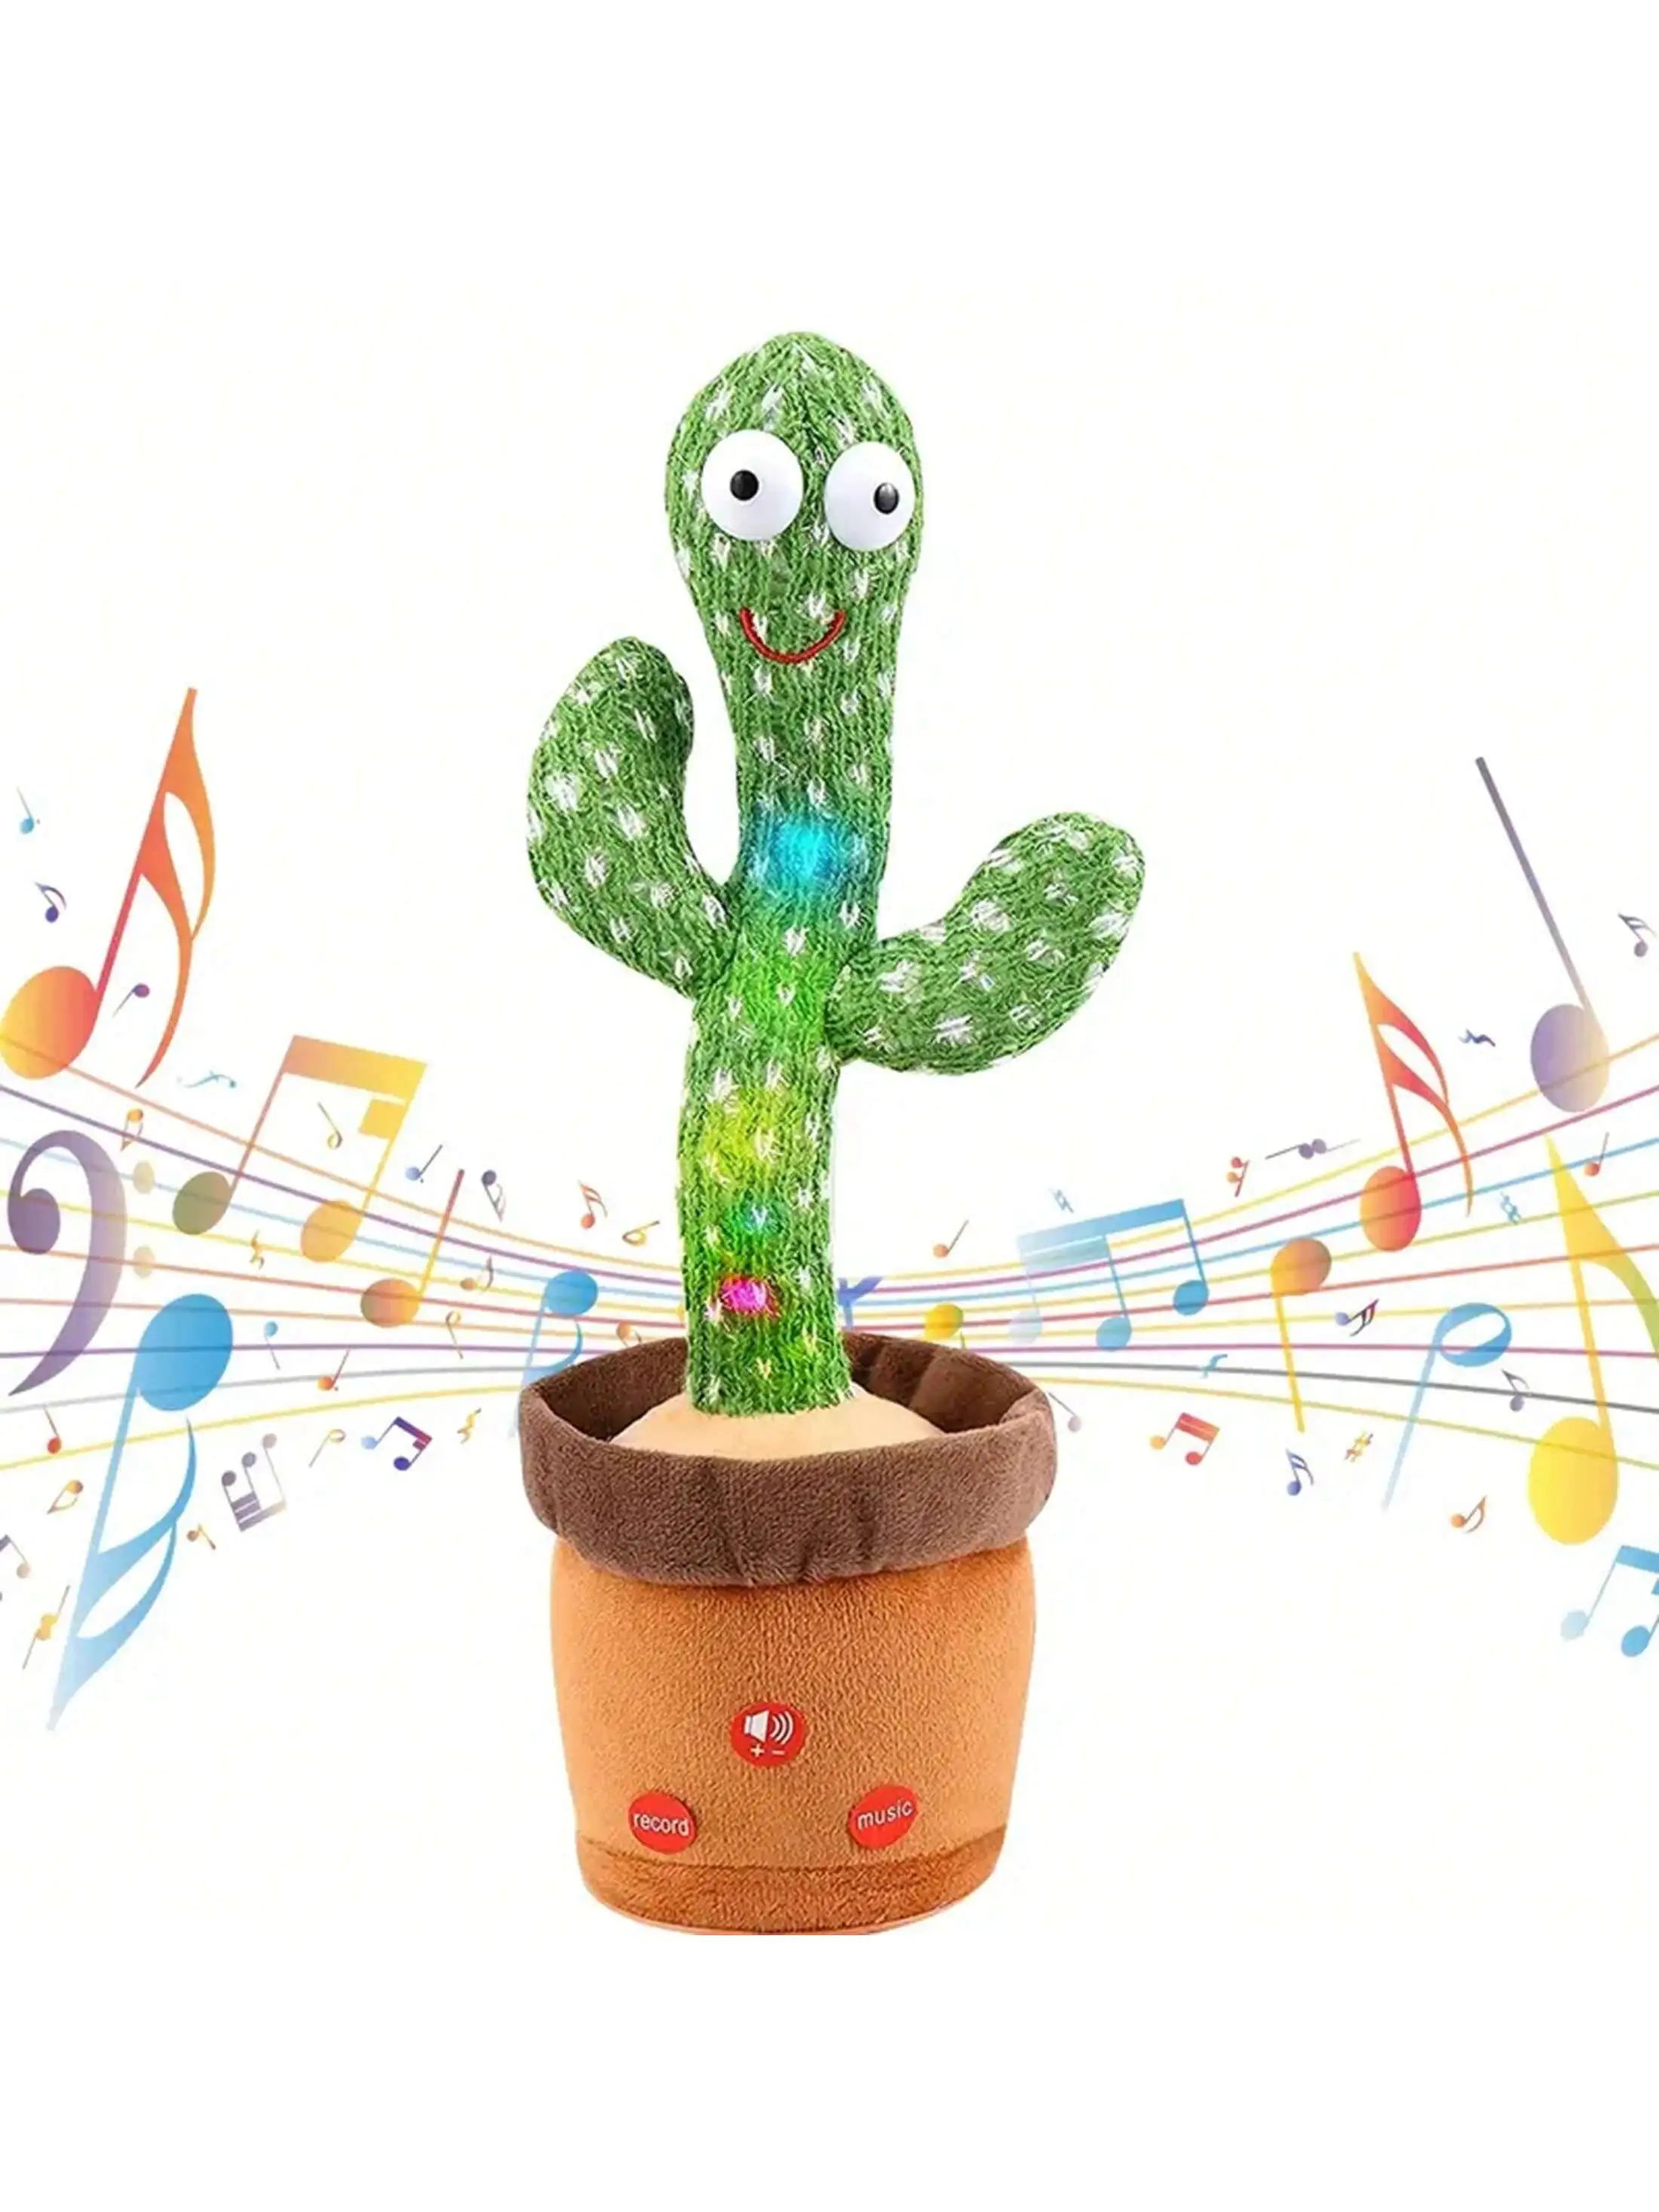 1pc-dancing-talking-cactus-toys-for-baby-boys-and-girls-singing-mimicking-recording-repeating-what-you-say-sunny-cactus-up-plus